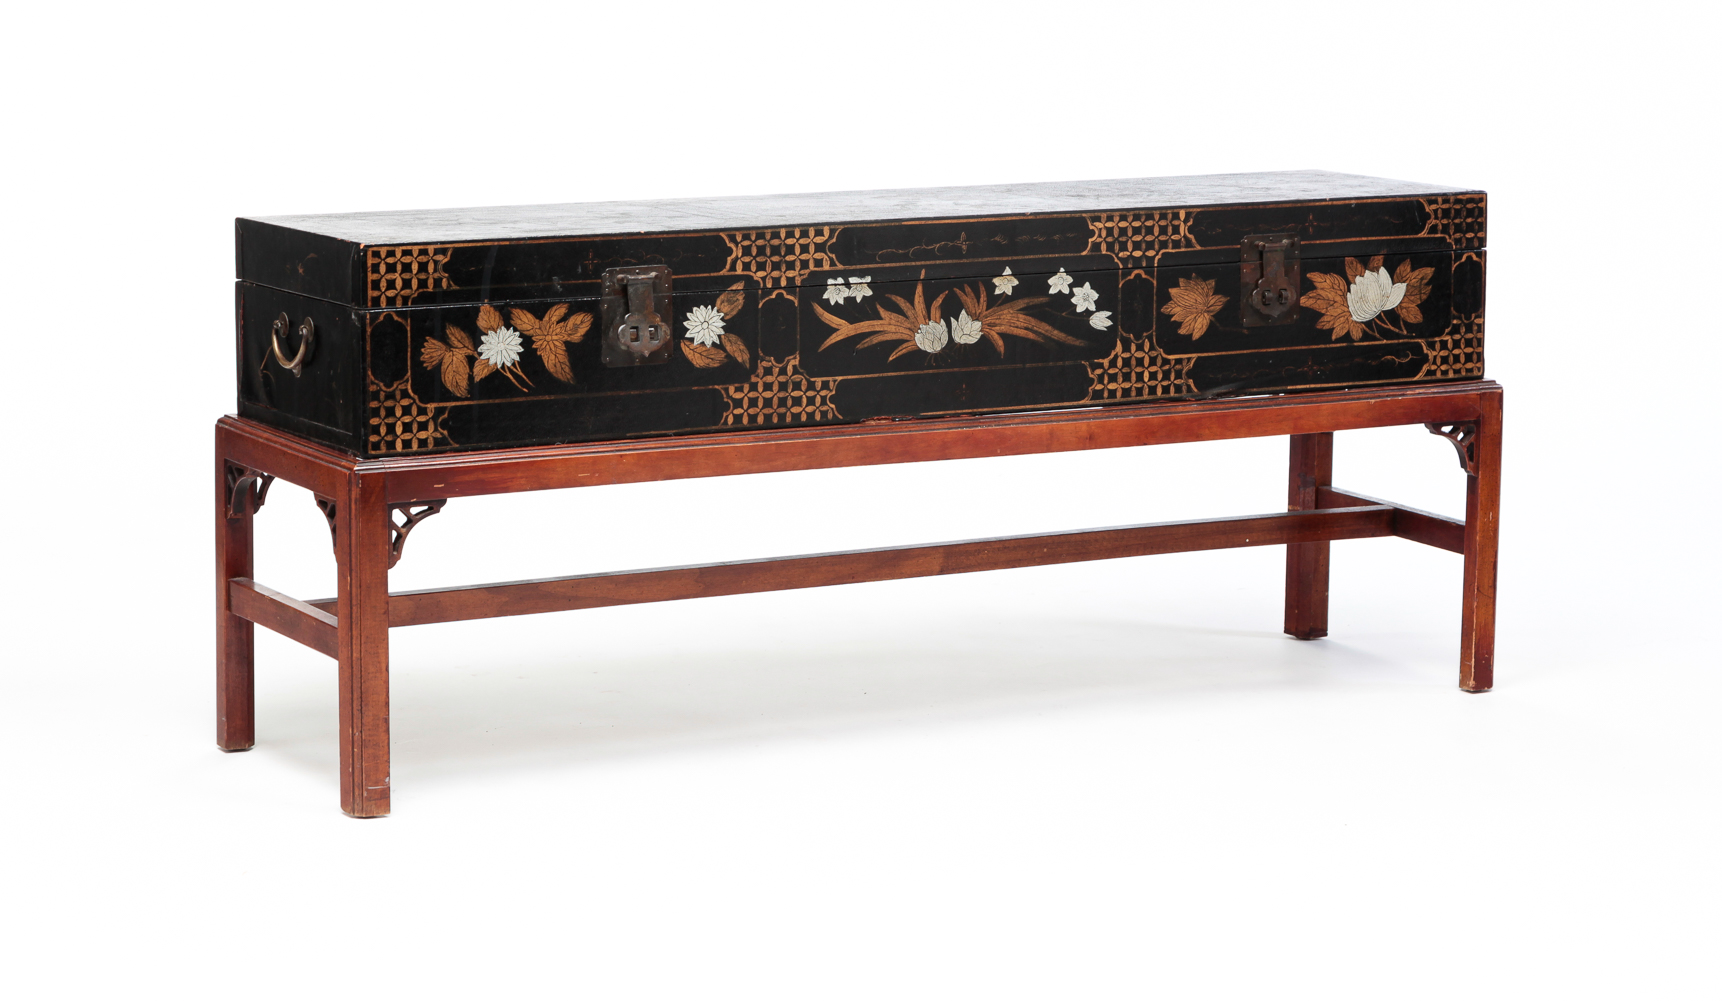 ASIAN PAINTED LEATHER TRUNK. Second